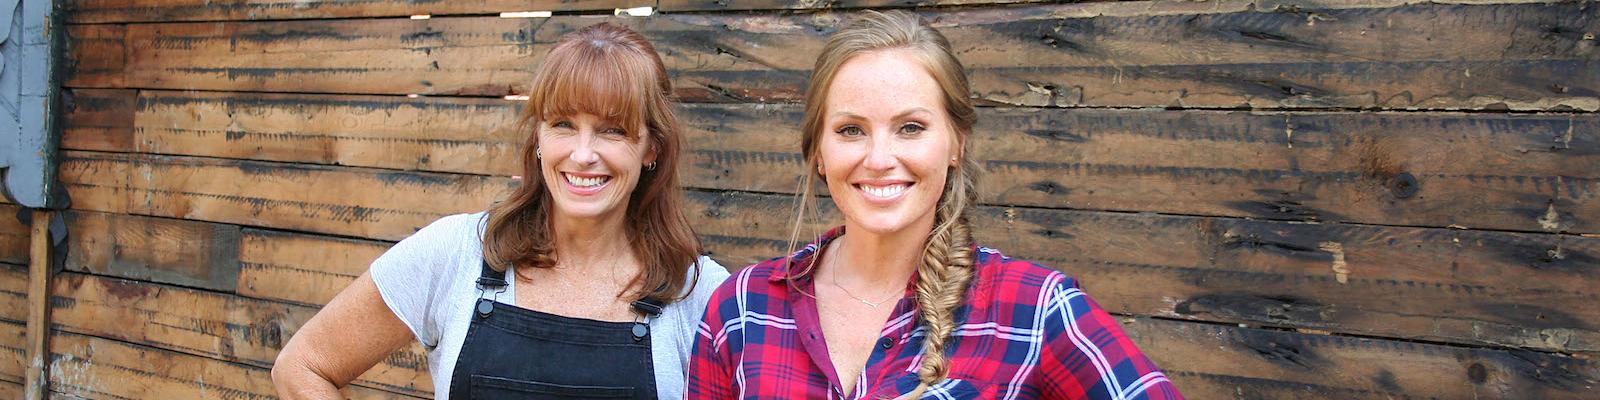 Karen E Laine and Mina Starsiak Hawk of HGTV's Good Bones pose for the camera with their hands on their hips.